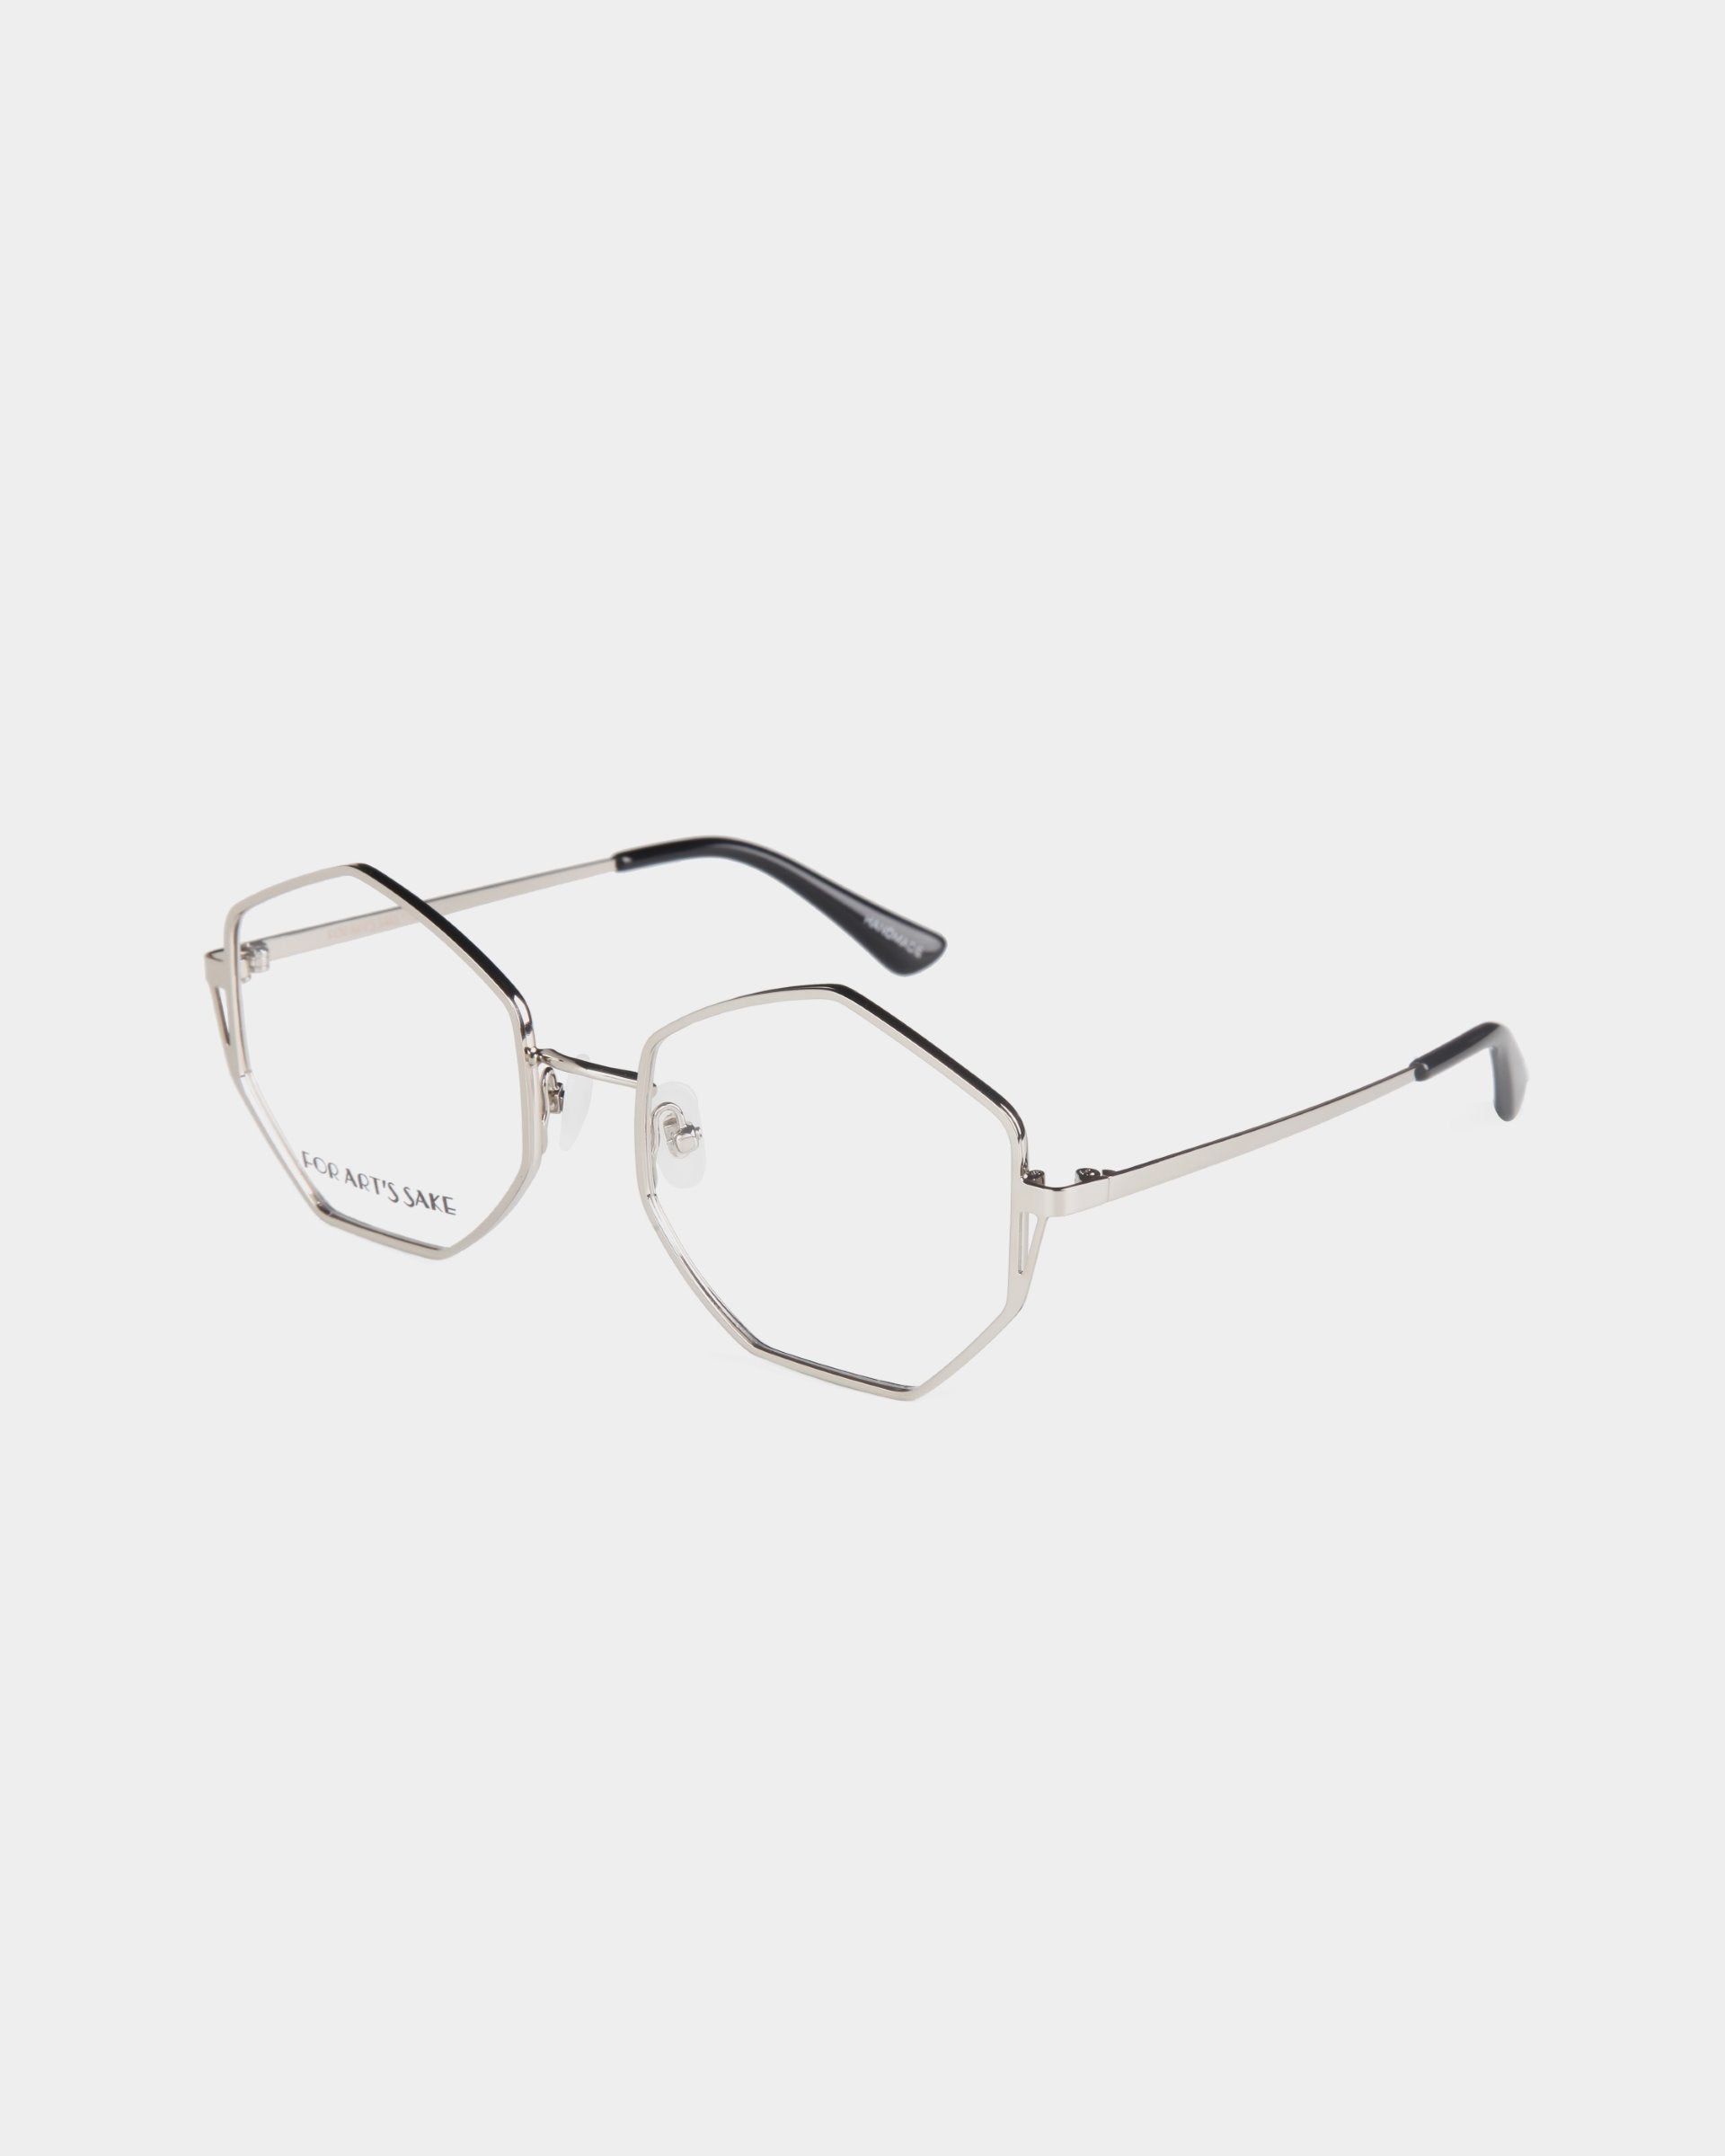 A pair of octagonal-shaped eyeglasses with thin silver metal frames and black tips on the arms. The lenses are clear and prescription-free, featuring a minimalist and modern design with adjustable jade nose pads. The words &quot;For Art&#39;s Sake® Antidote&quot; are visible on one of the lenses.